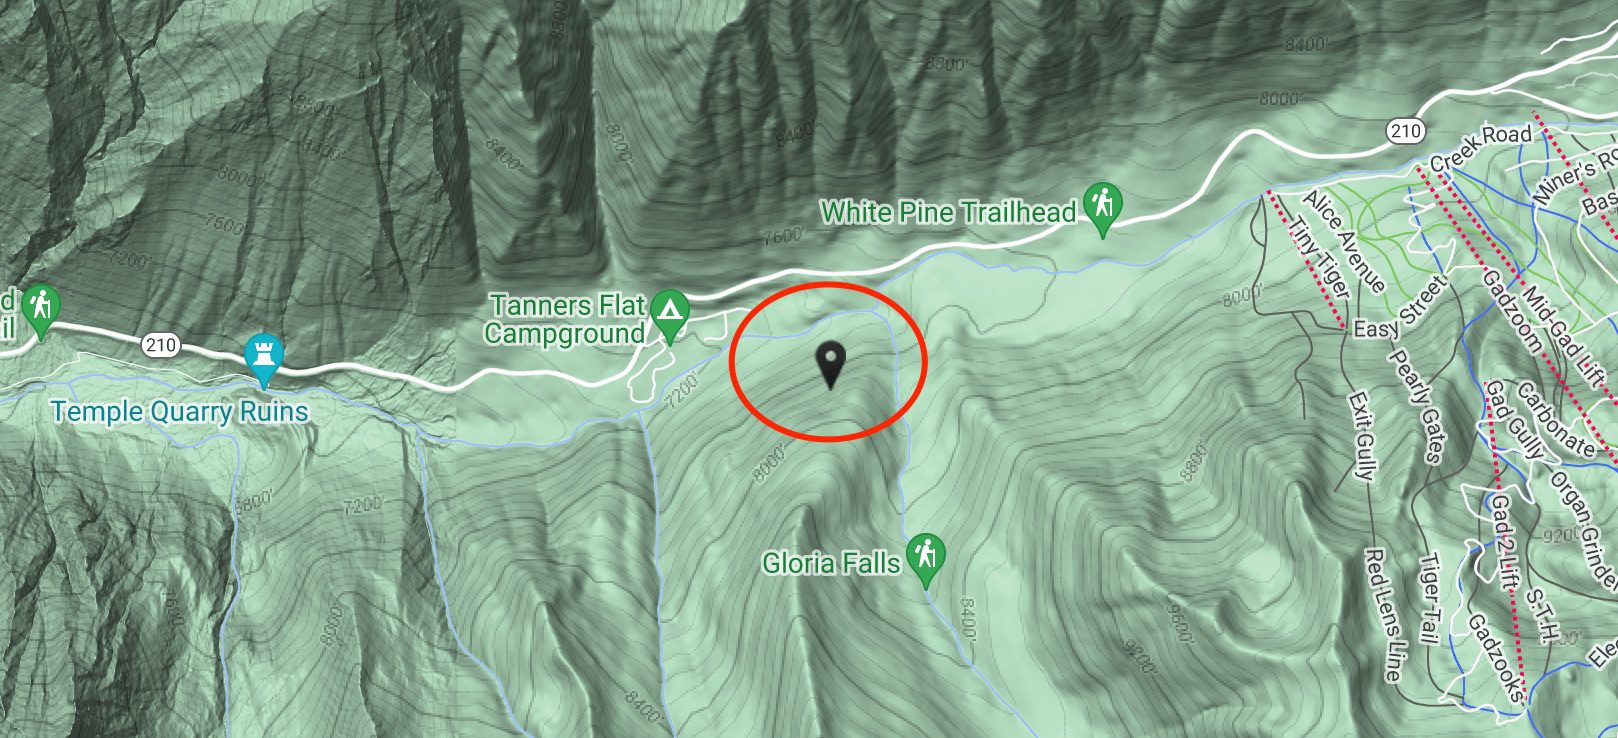 Red Pine Drainage Avalanche Location in Little Cottonwood Canyon